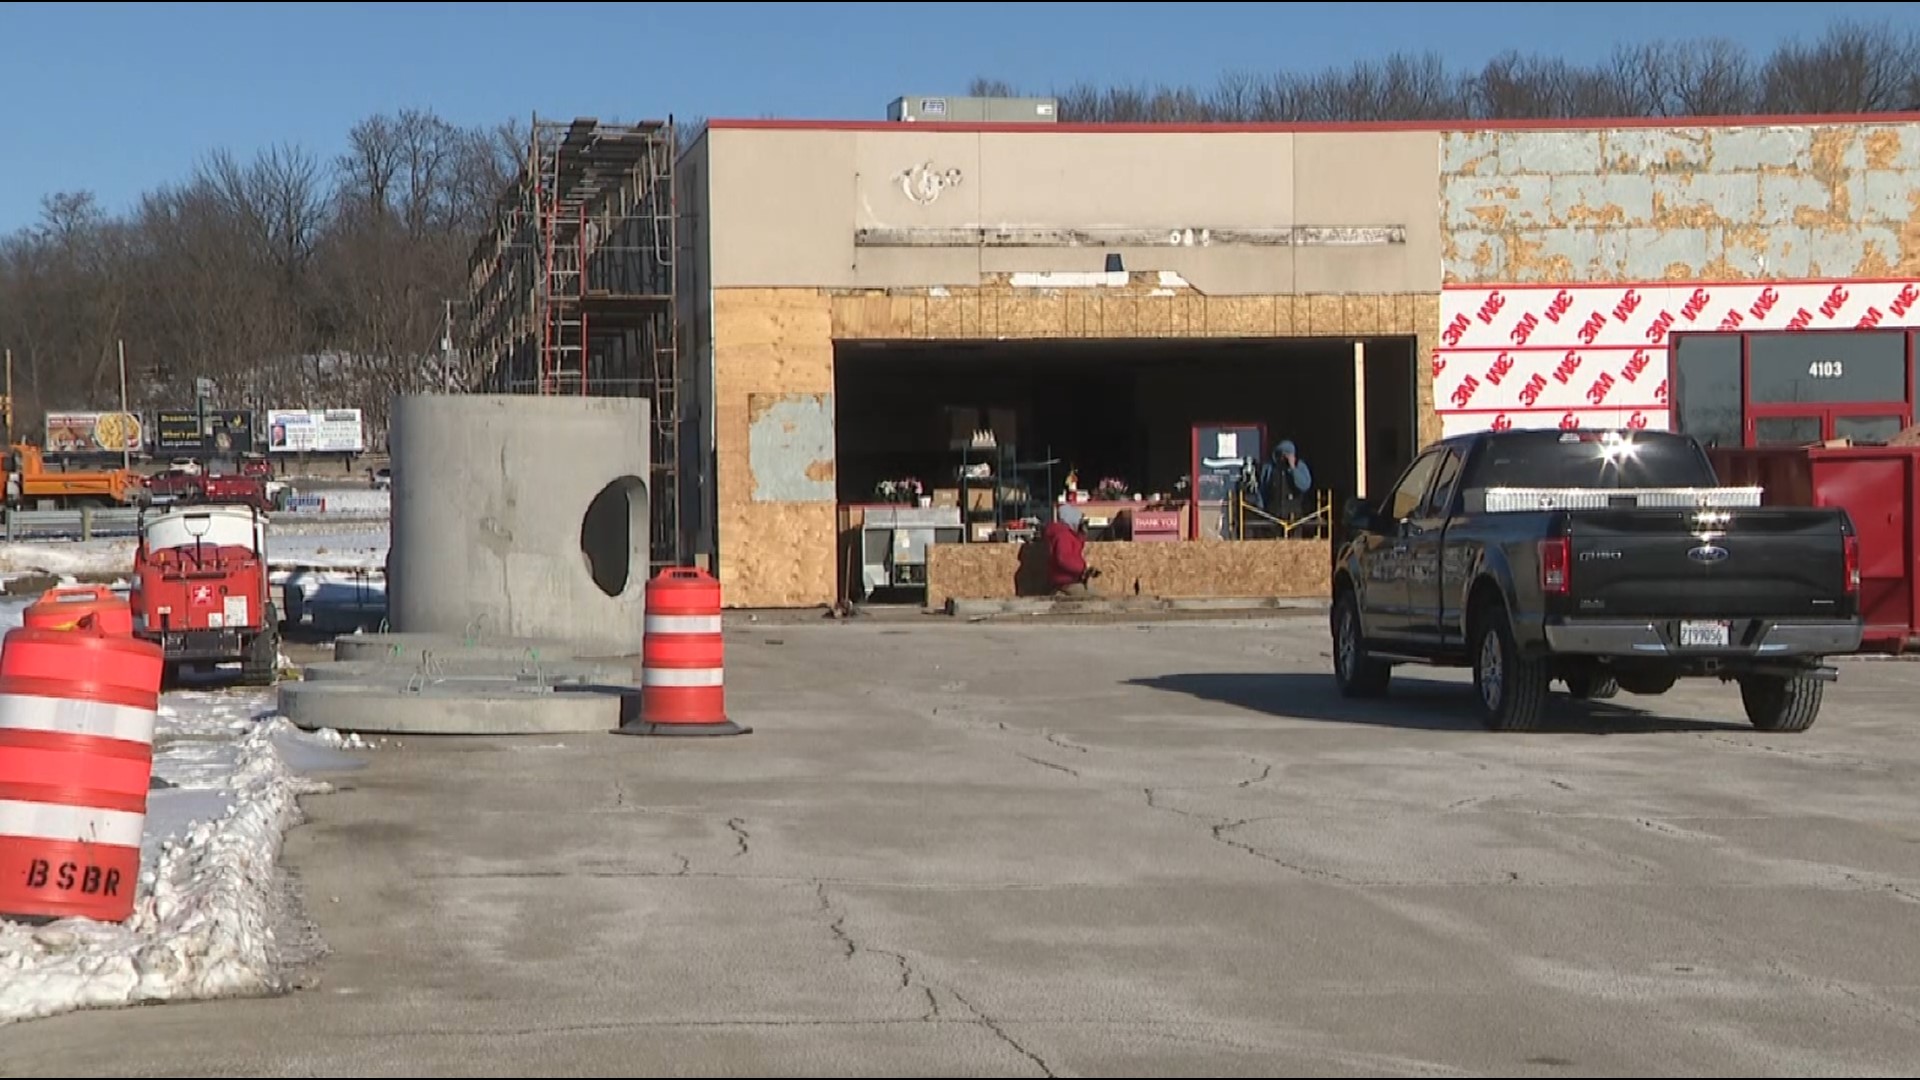 The Hungry Hobo on John Deere Road in Moline is under renovations and adding a drive-thru lane